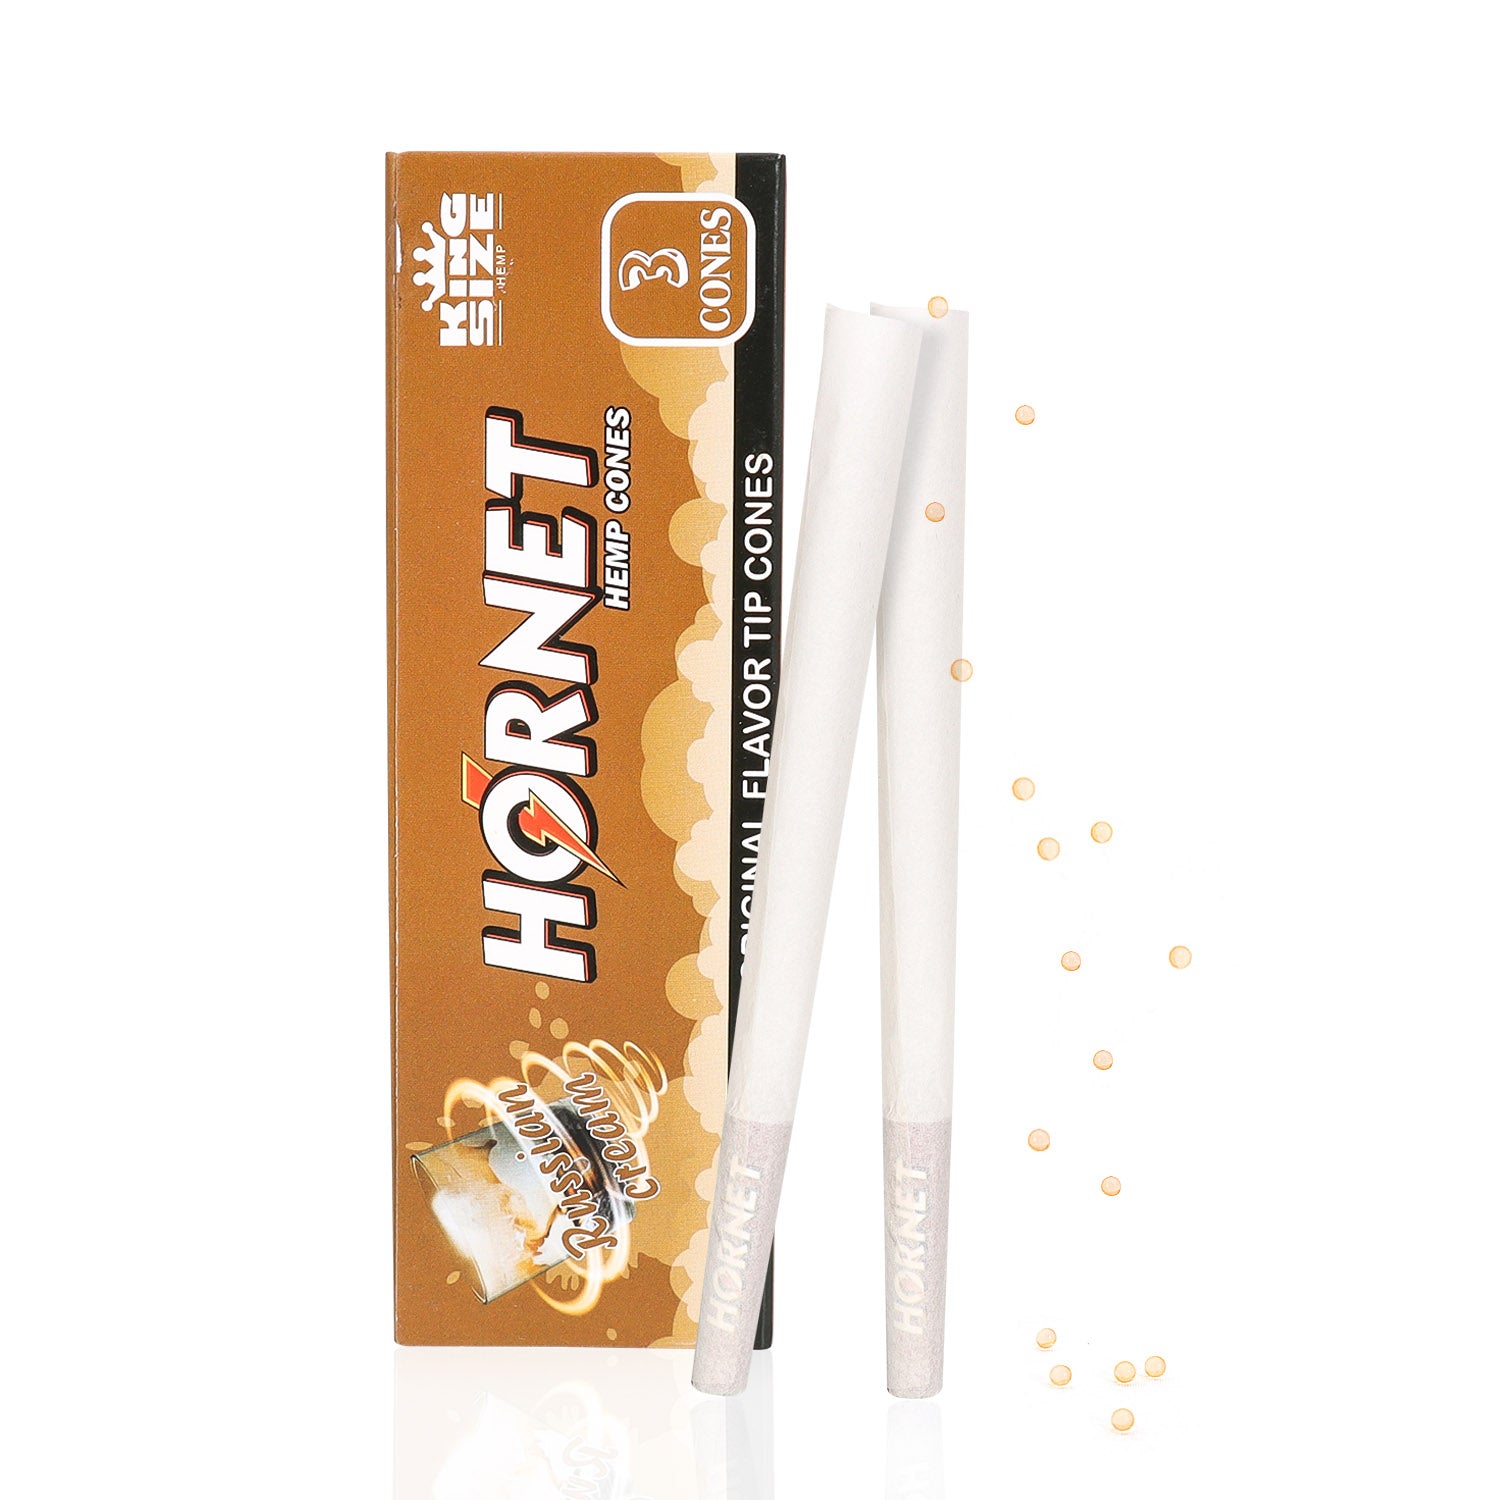 HORNET Russia Cream Flavors Pre Rolled Cones With Tips, King Size Pre Rolled Rolling Paper & Flavored Pop, 3 PCS / Pack 12 Pack / Box